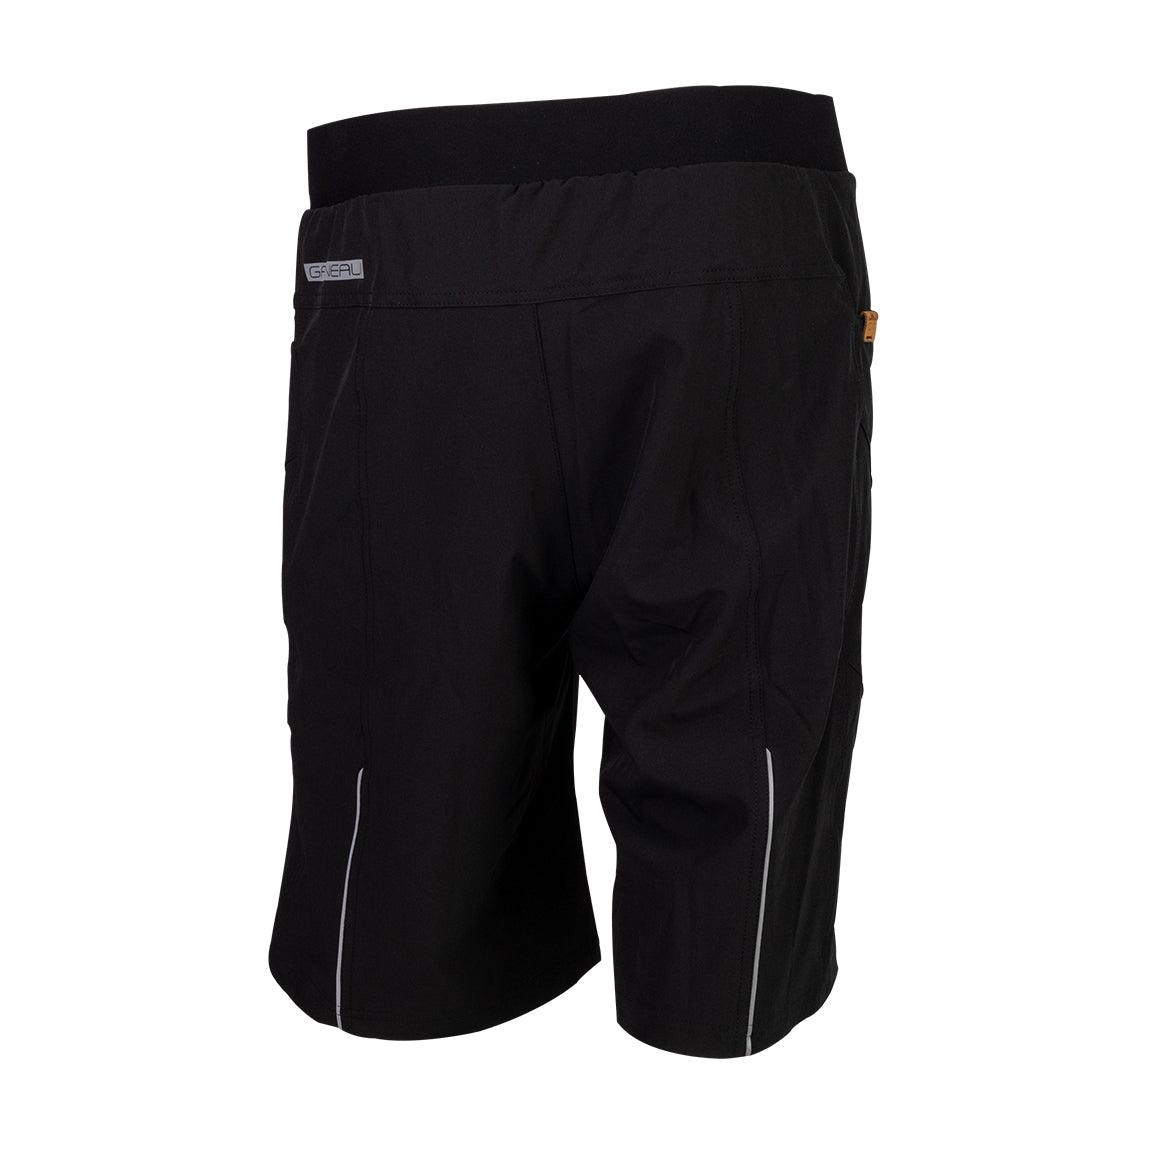 Optimum Cycling Shorts - Sports Excellence